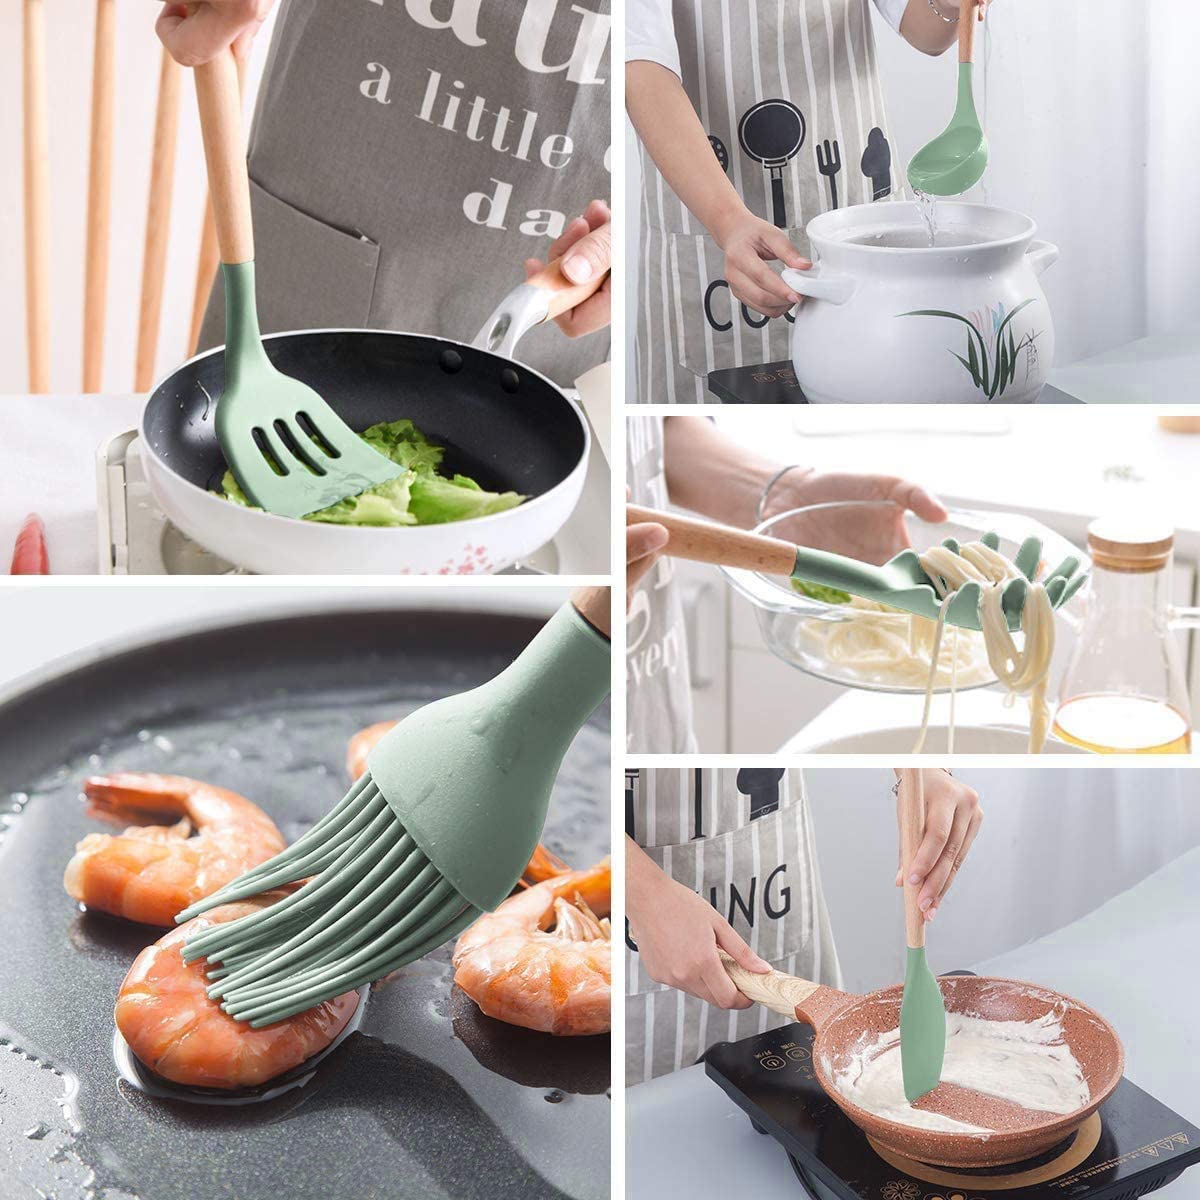 VIO 12PCS Kitchen Utensil Set Silicone Cooking Utensils Kit Spatula Heat Resistant Wooden Spoons Gadgets Tool for Non-Stick Cookware (GREEN)